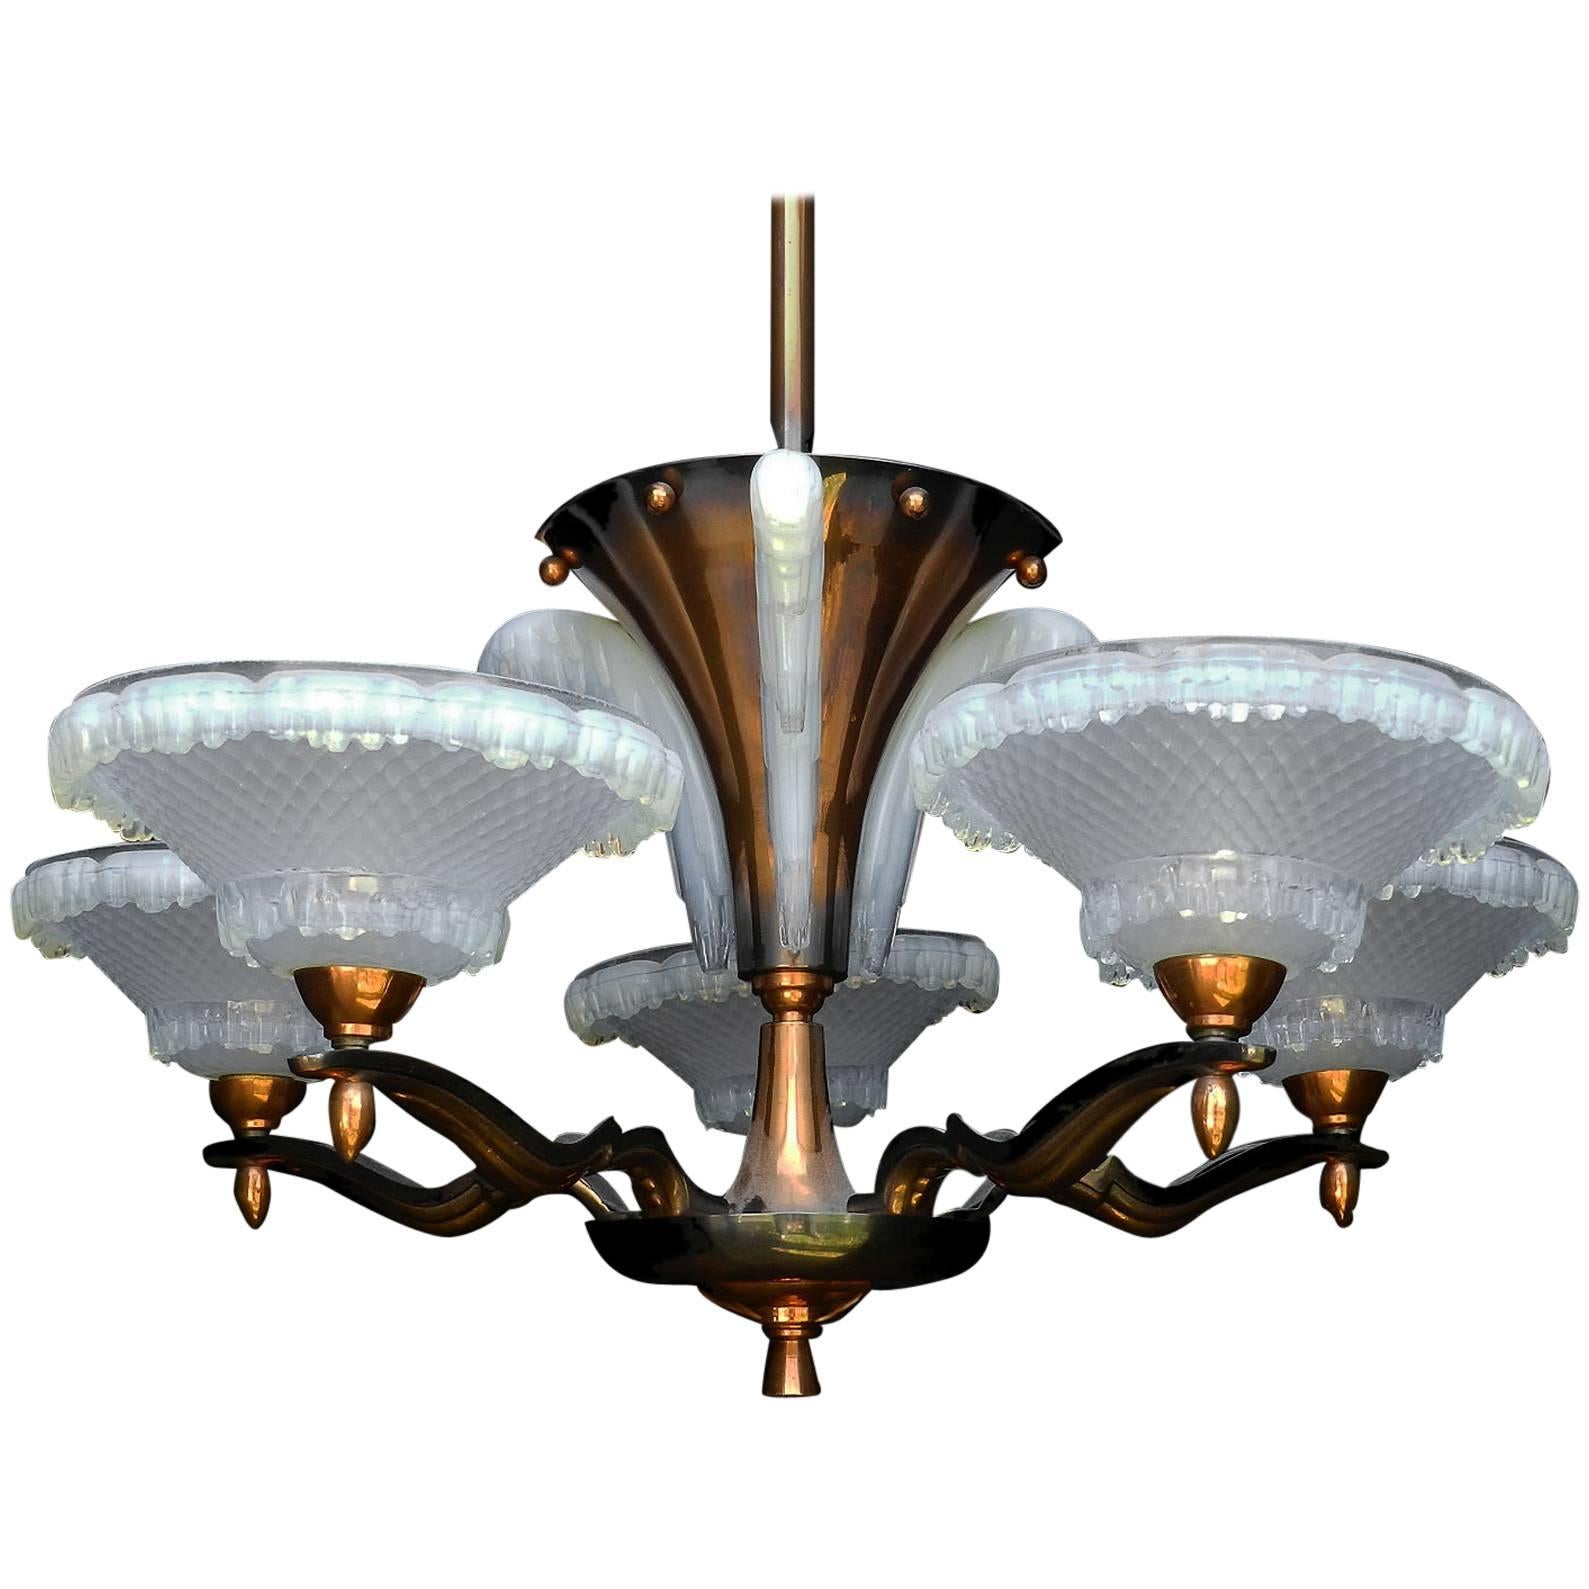 Art Deco Chandelier by Ezan and Petitot French Opalescent Glass and Copper, 1930